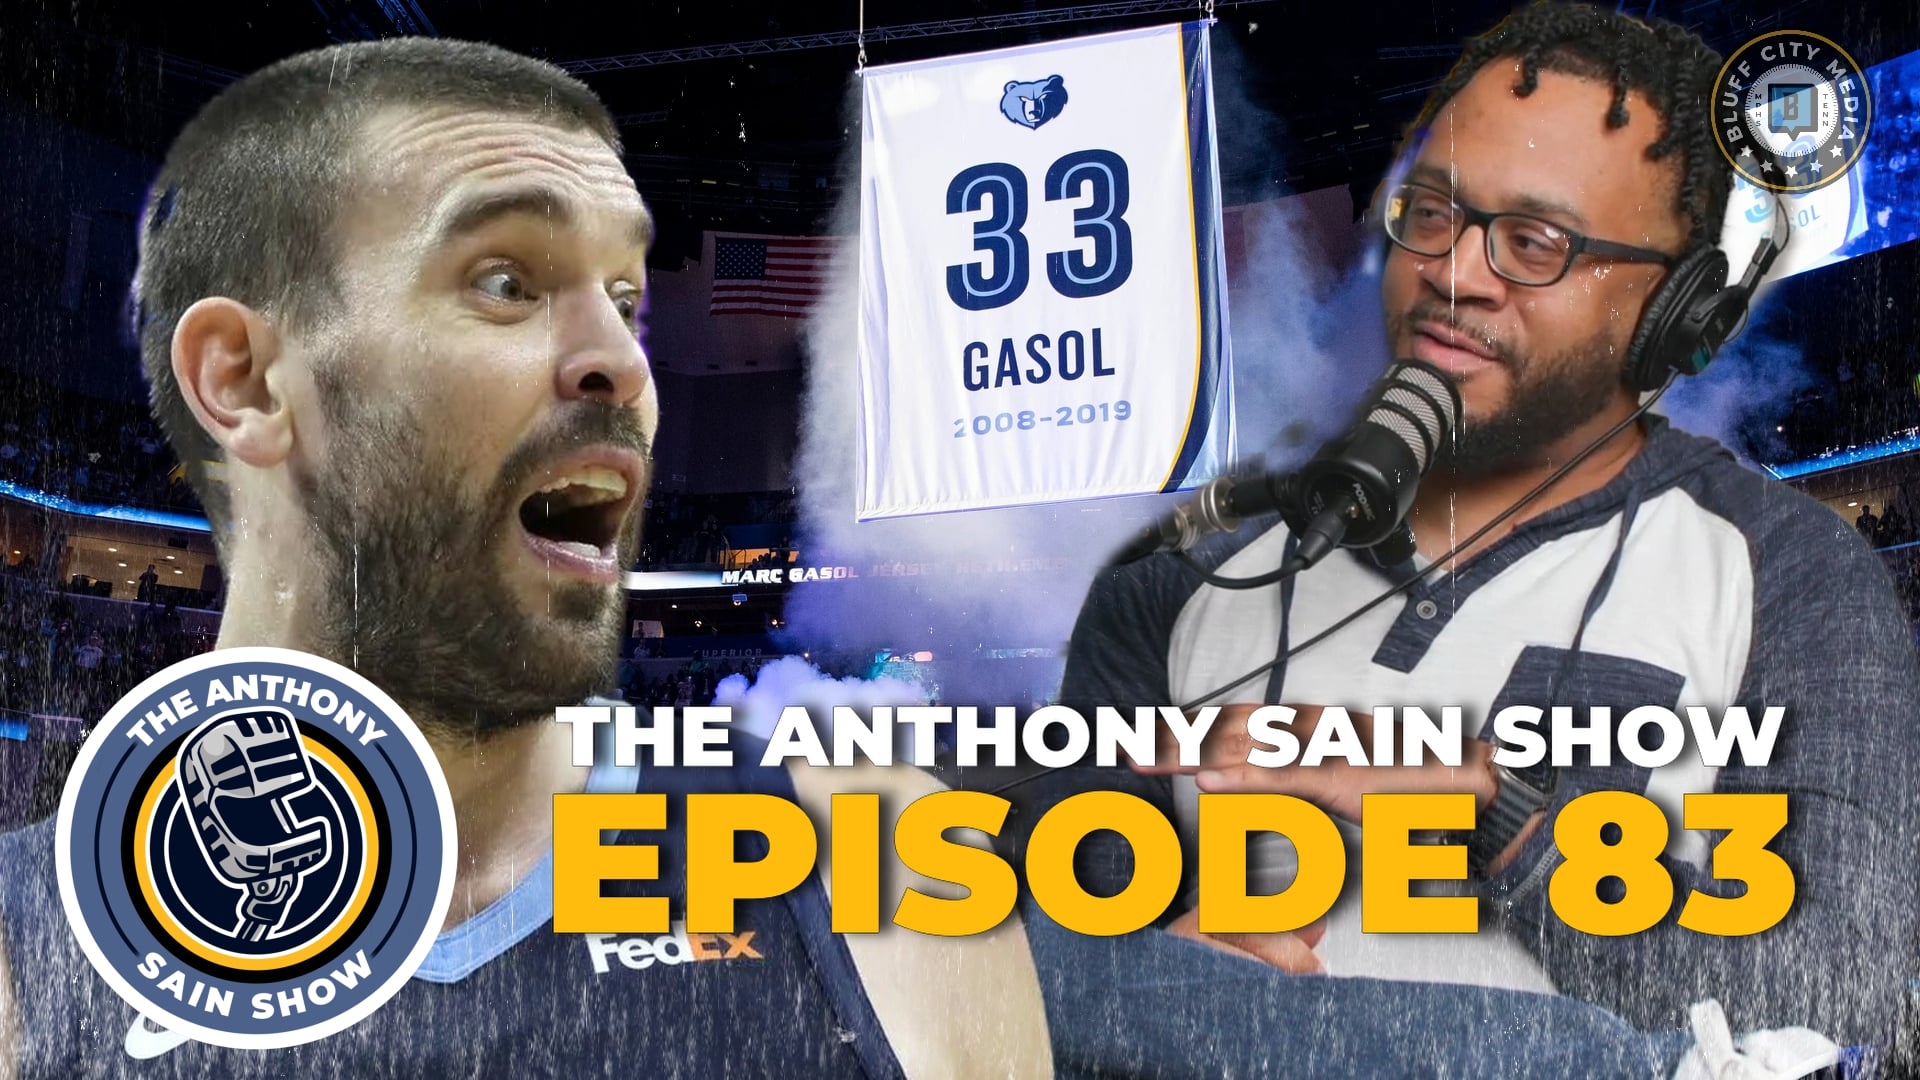 Featured image for “The Anthony Sain Show Ep 83: Marc Gasol’s Jersey Retirement Controversy, Tale of Two Championships”